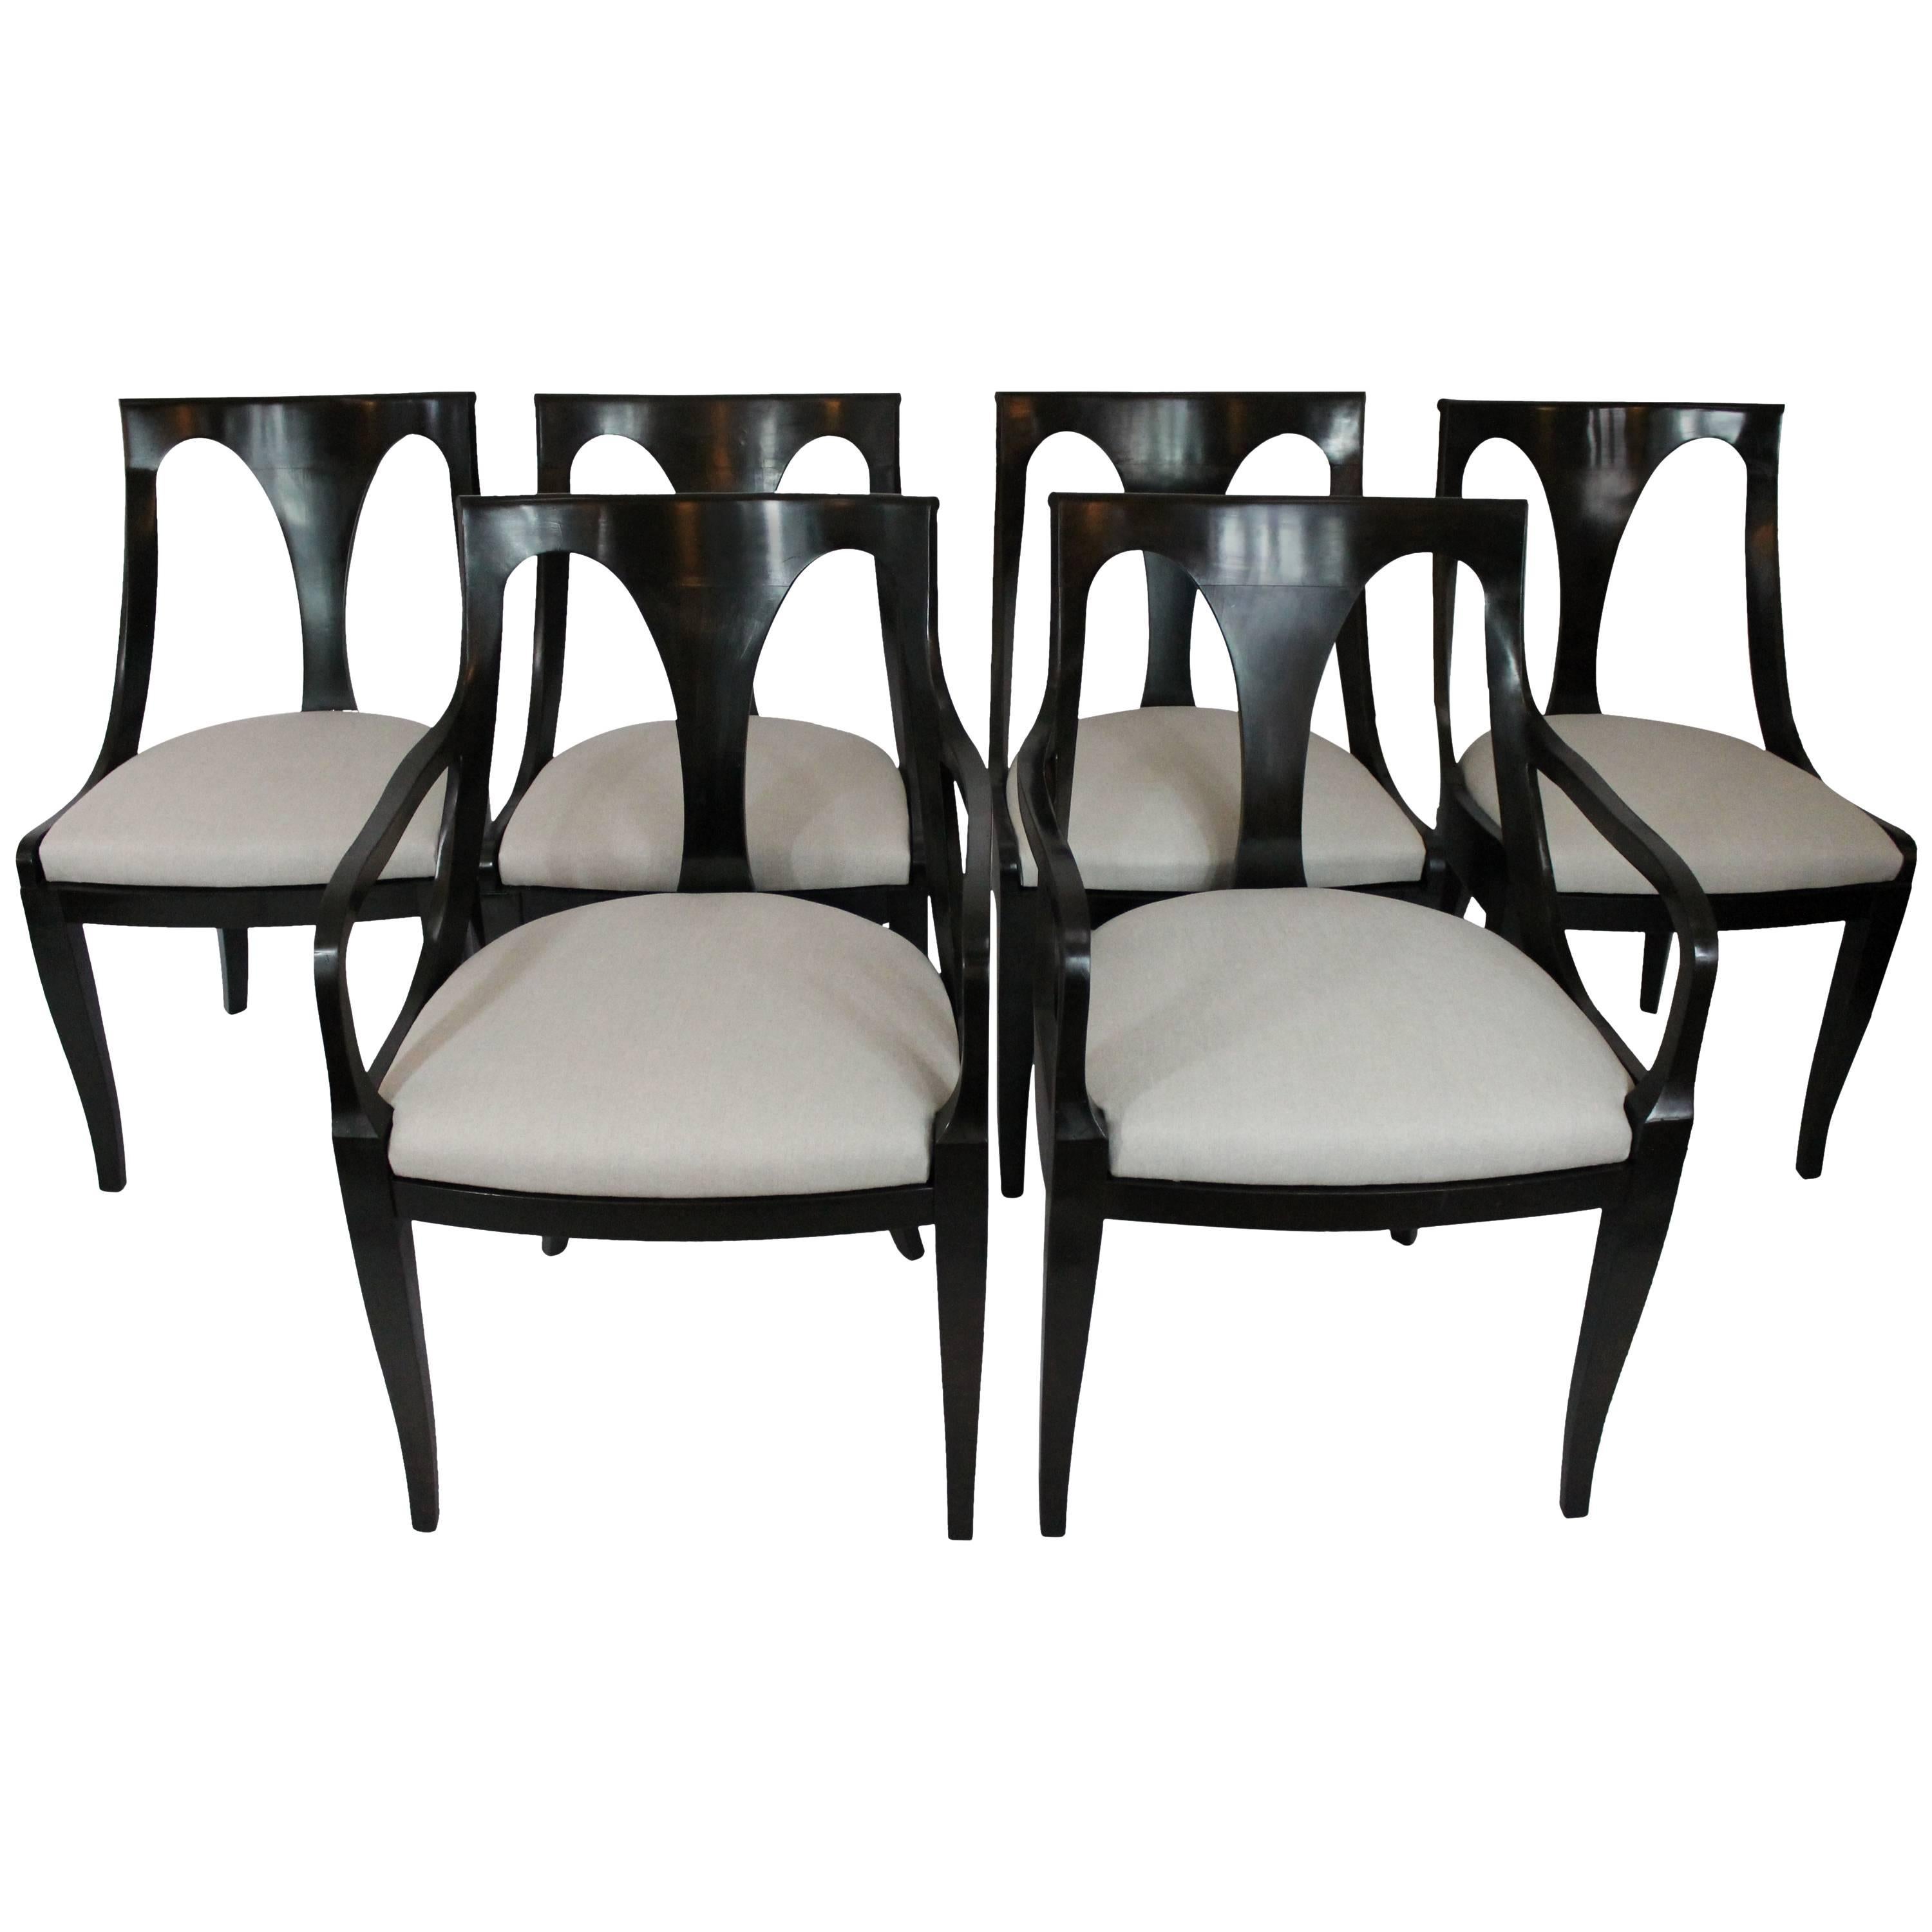 Set of Six Empire-Inspired Dining Chairs by Kindel For Sale